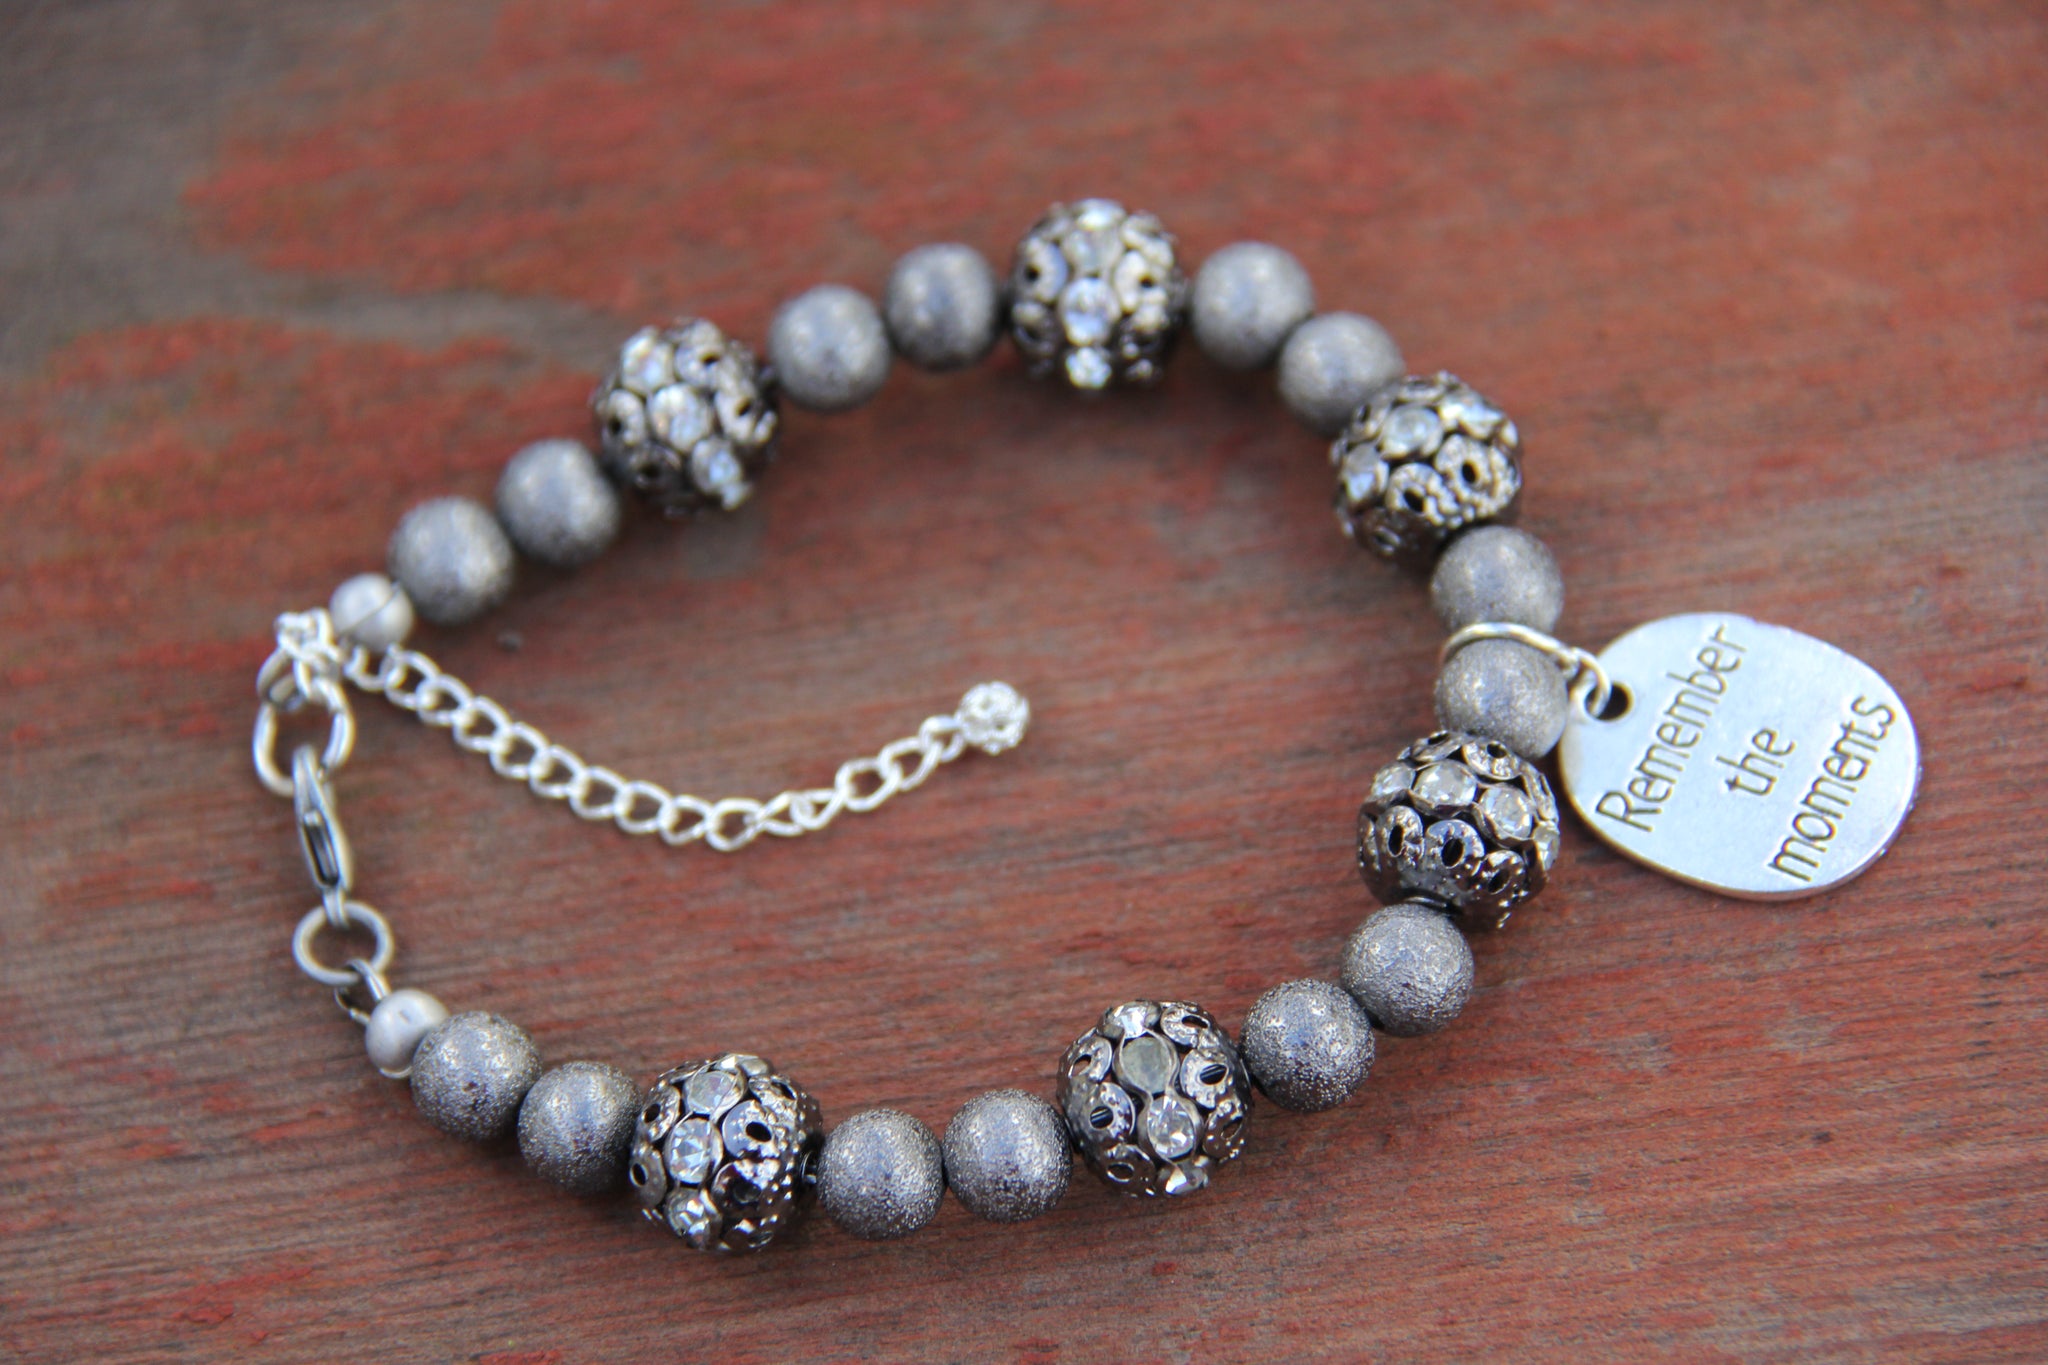 Grey colored lite weight beads with "Remember the moments" silver charm